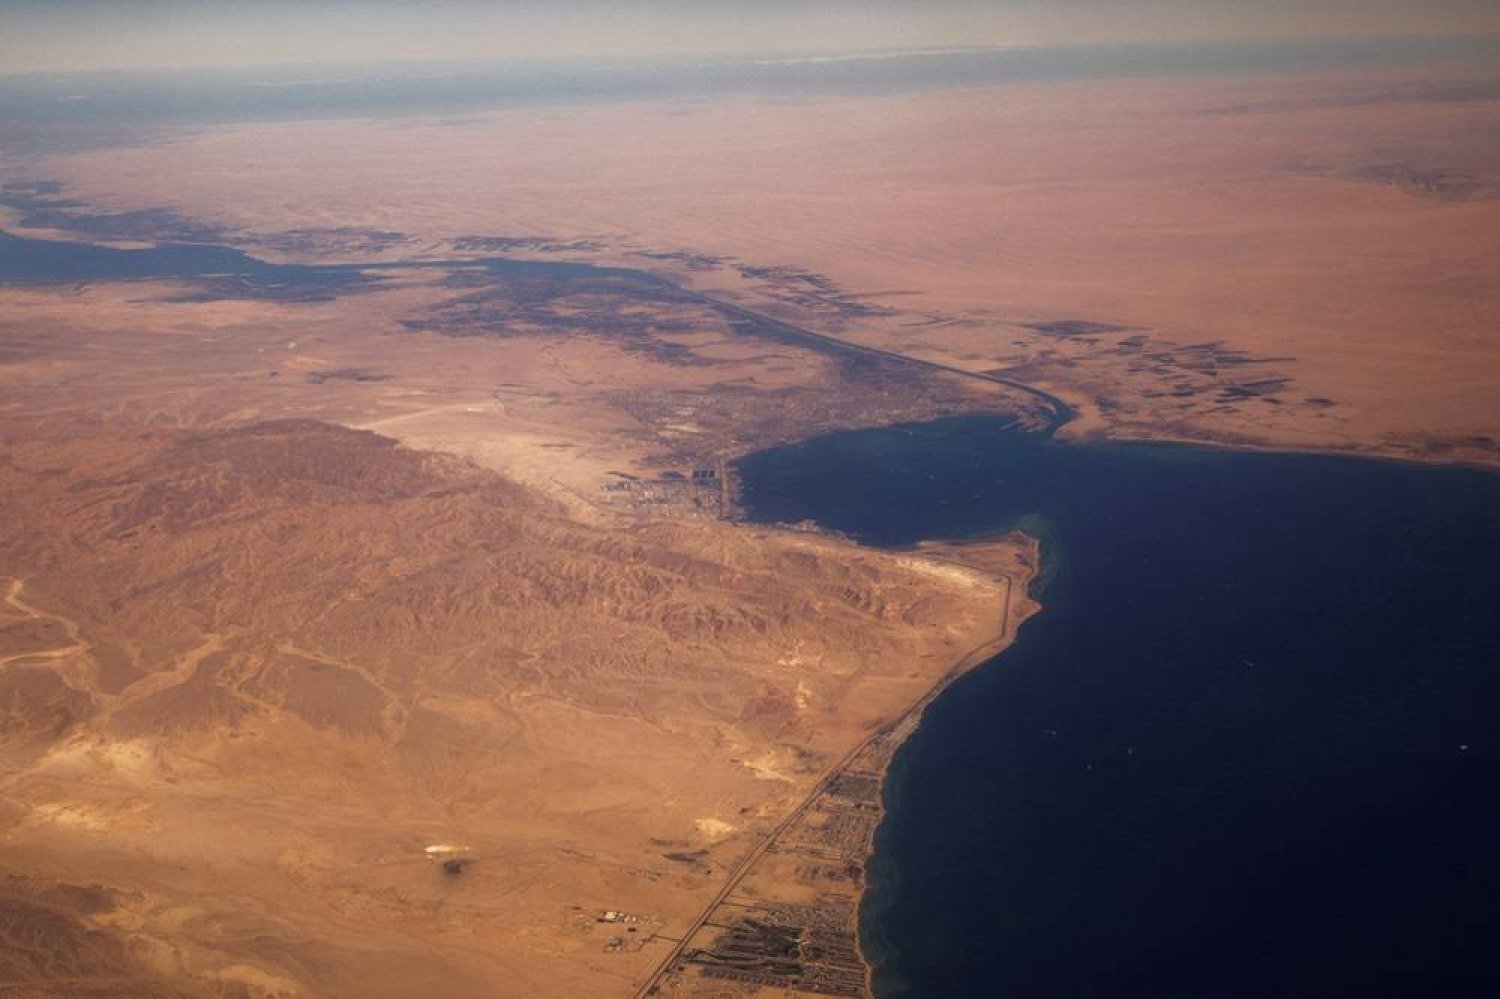 The Suez Canal connecting the Mediterranean Sea to the Red Sea is pictured from the window of a commercial plane flying over Egypt, December 18, 2019. (Reuters)